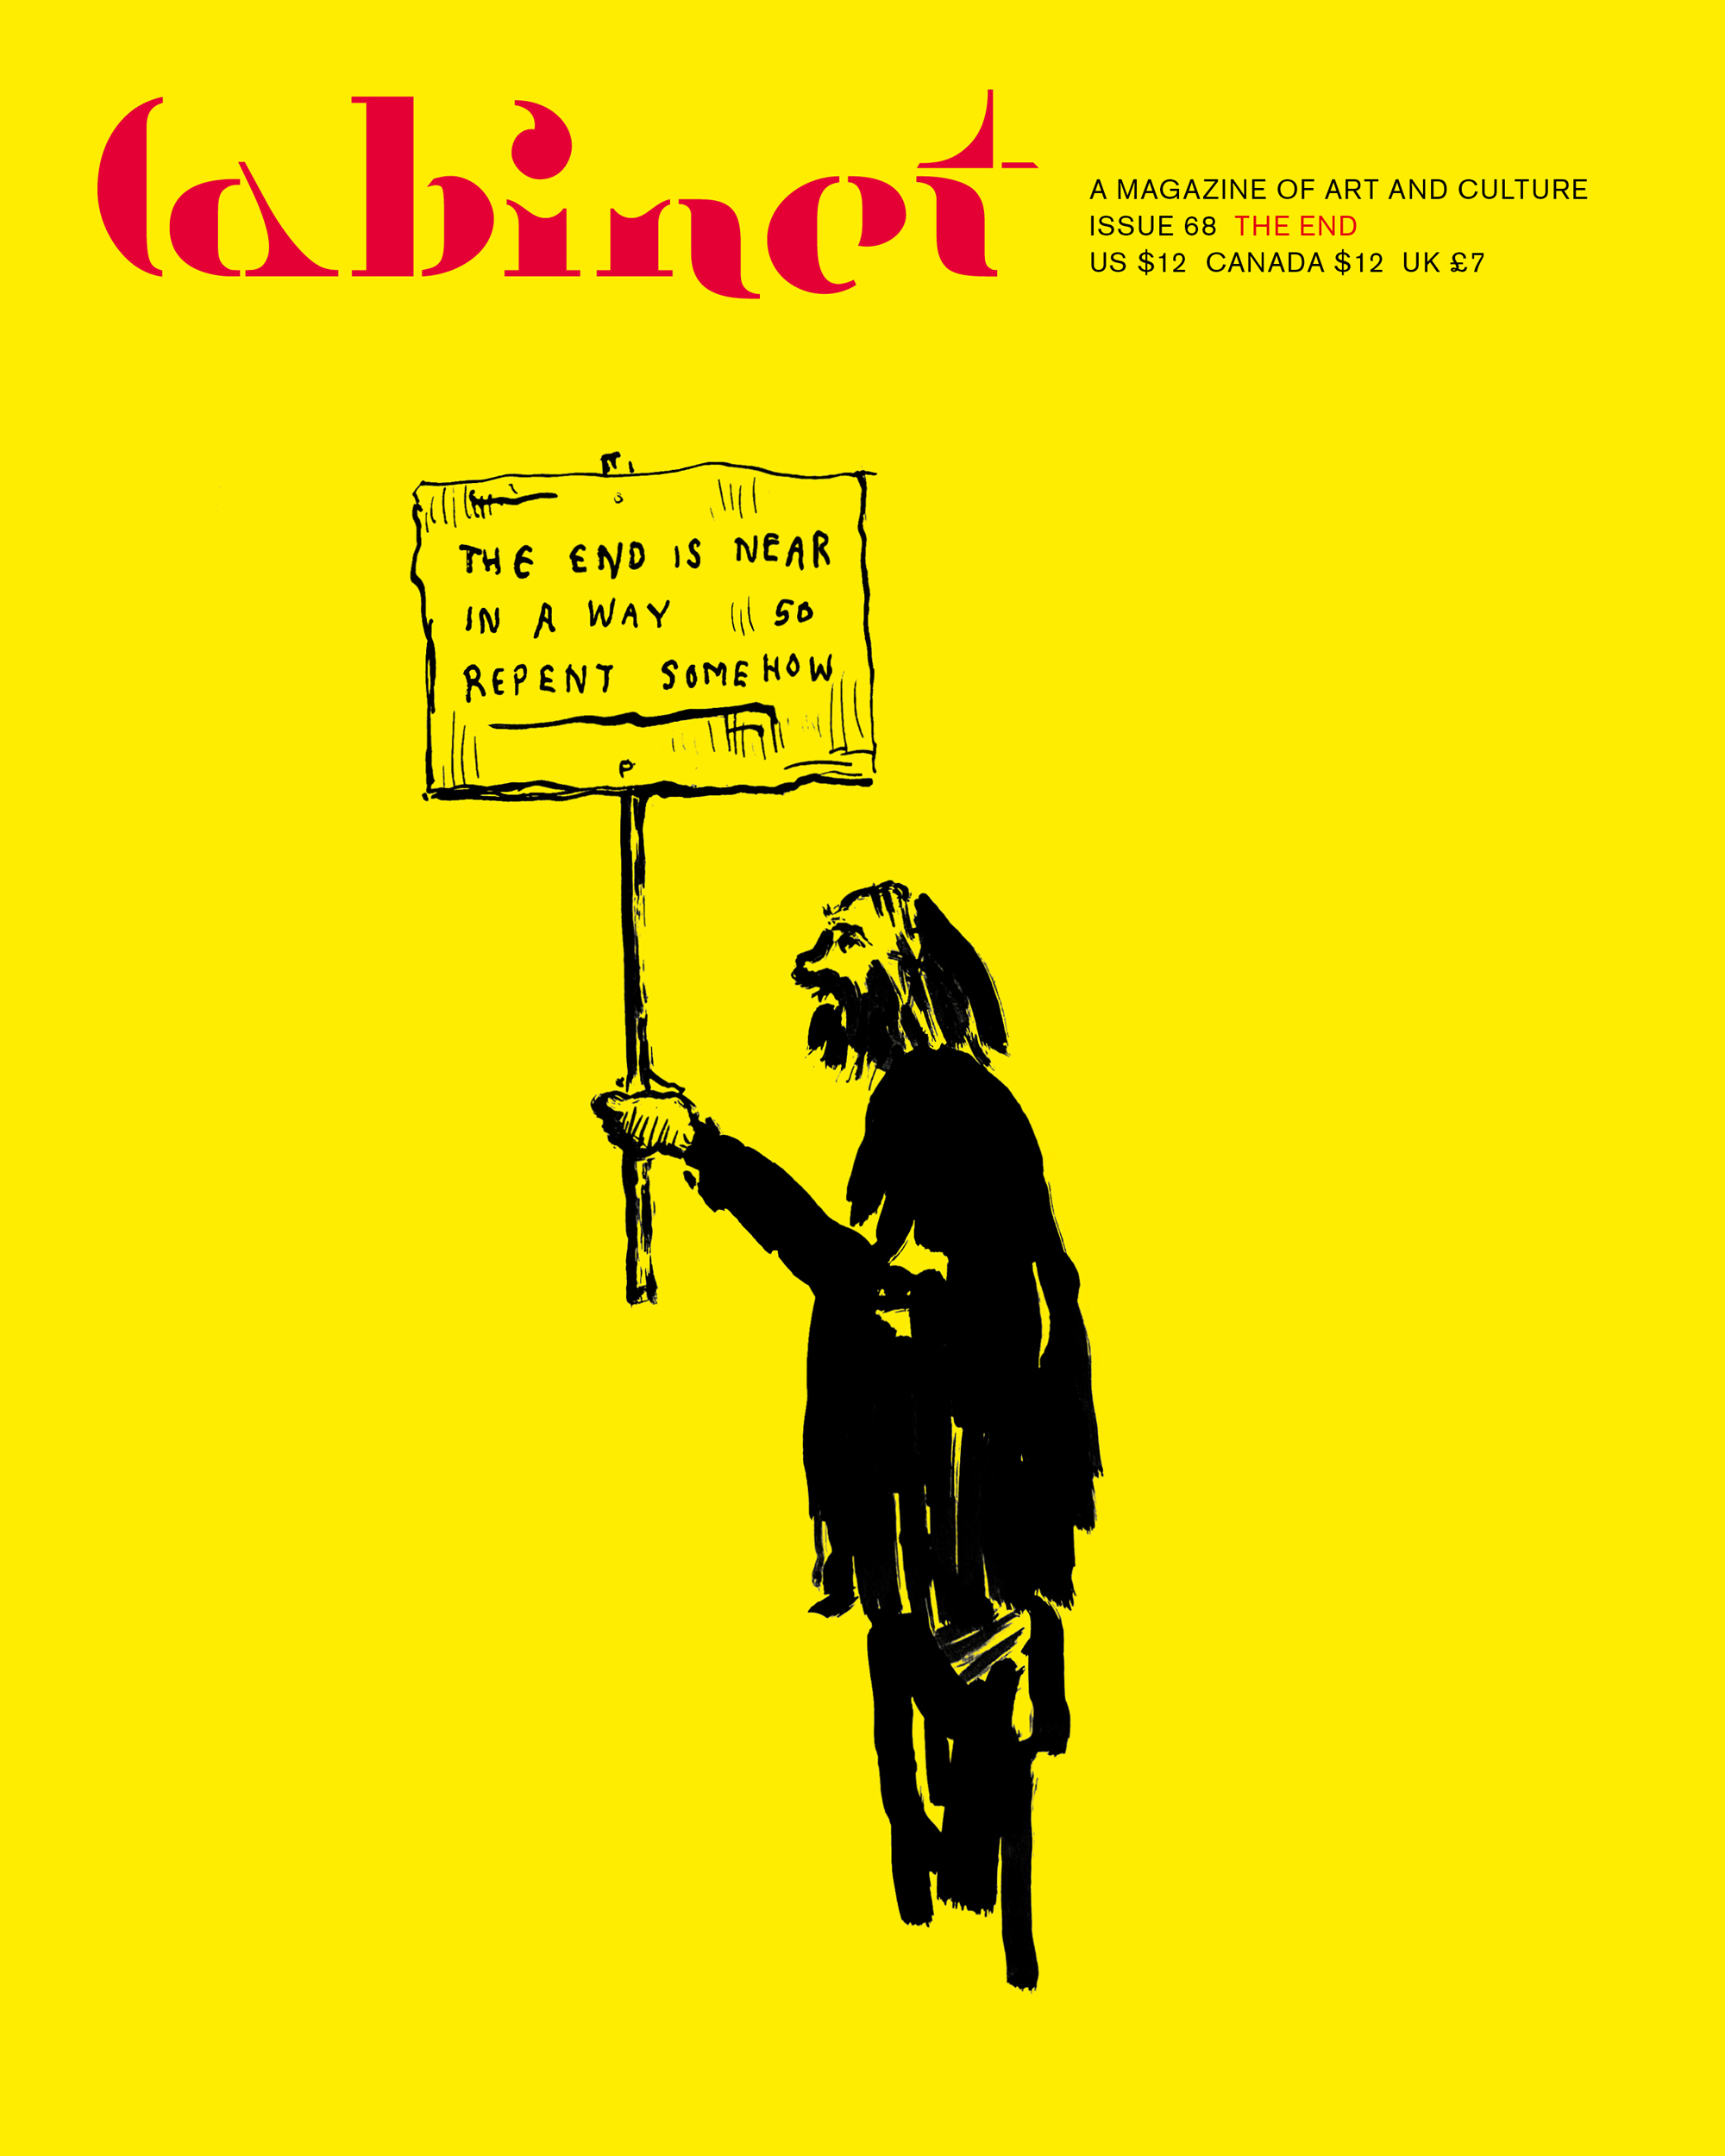 Cover drawing by David Scher depicting an older man holding a sign that says: “The end is near in a way so repent somehow.”